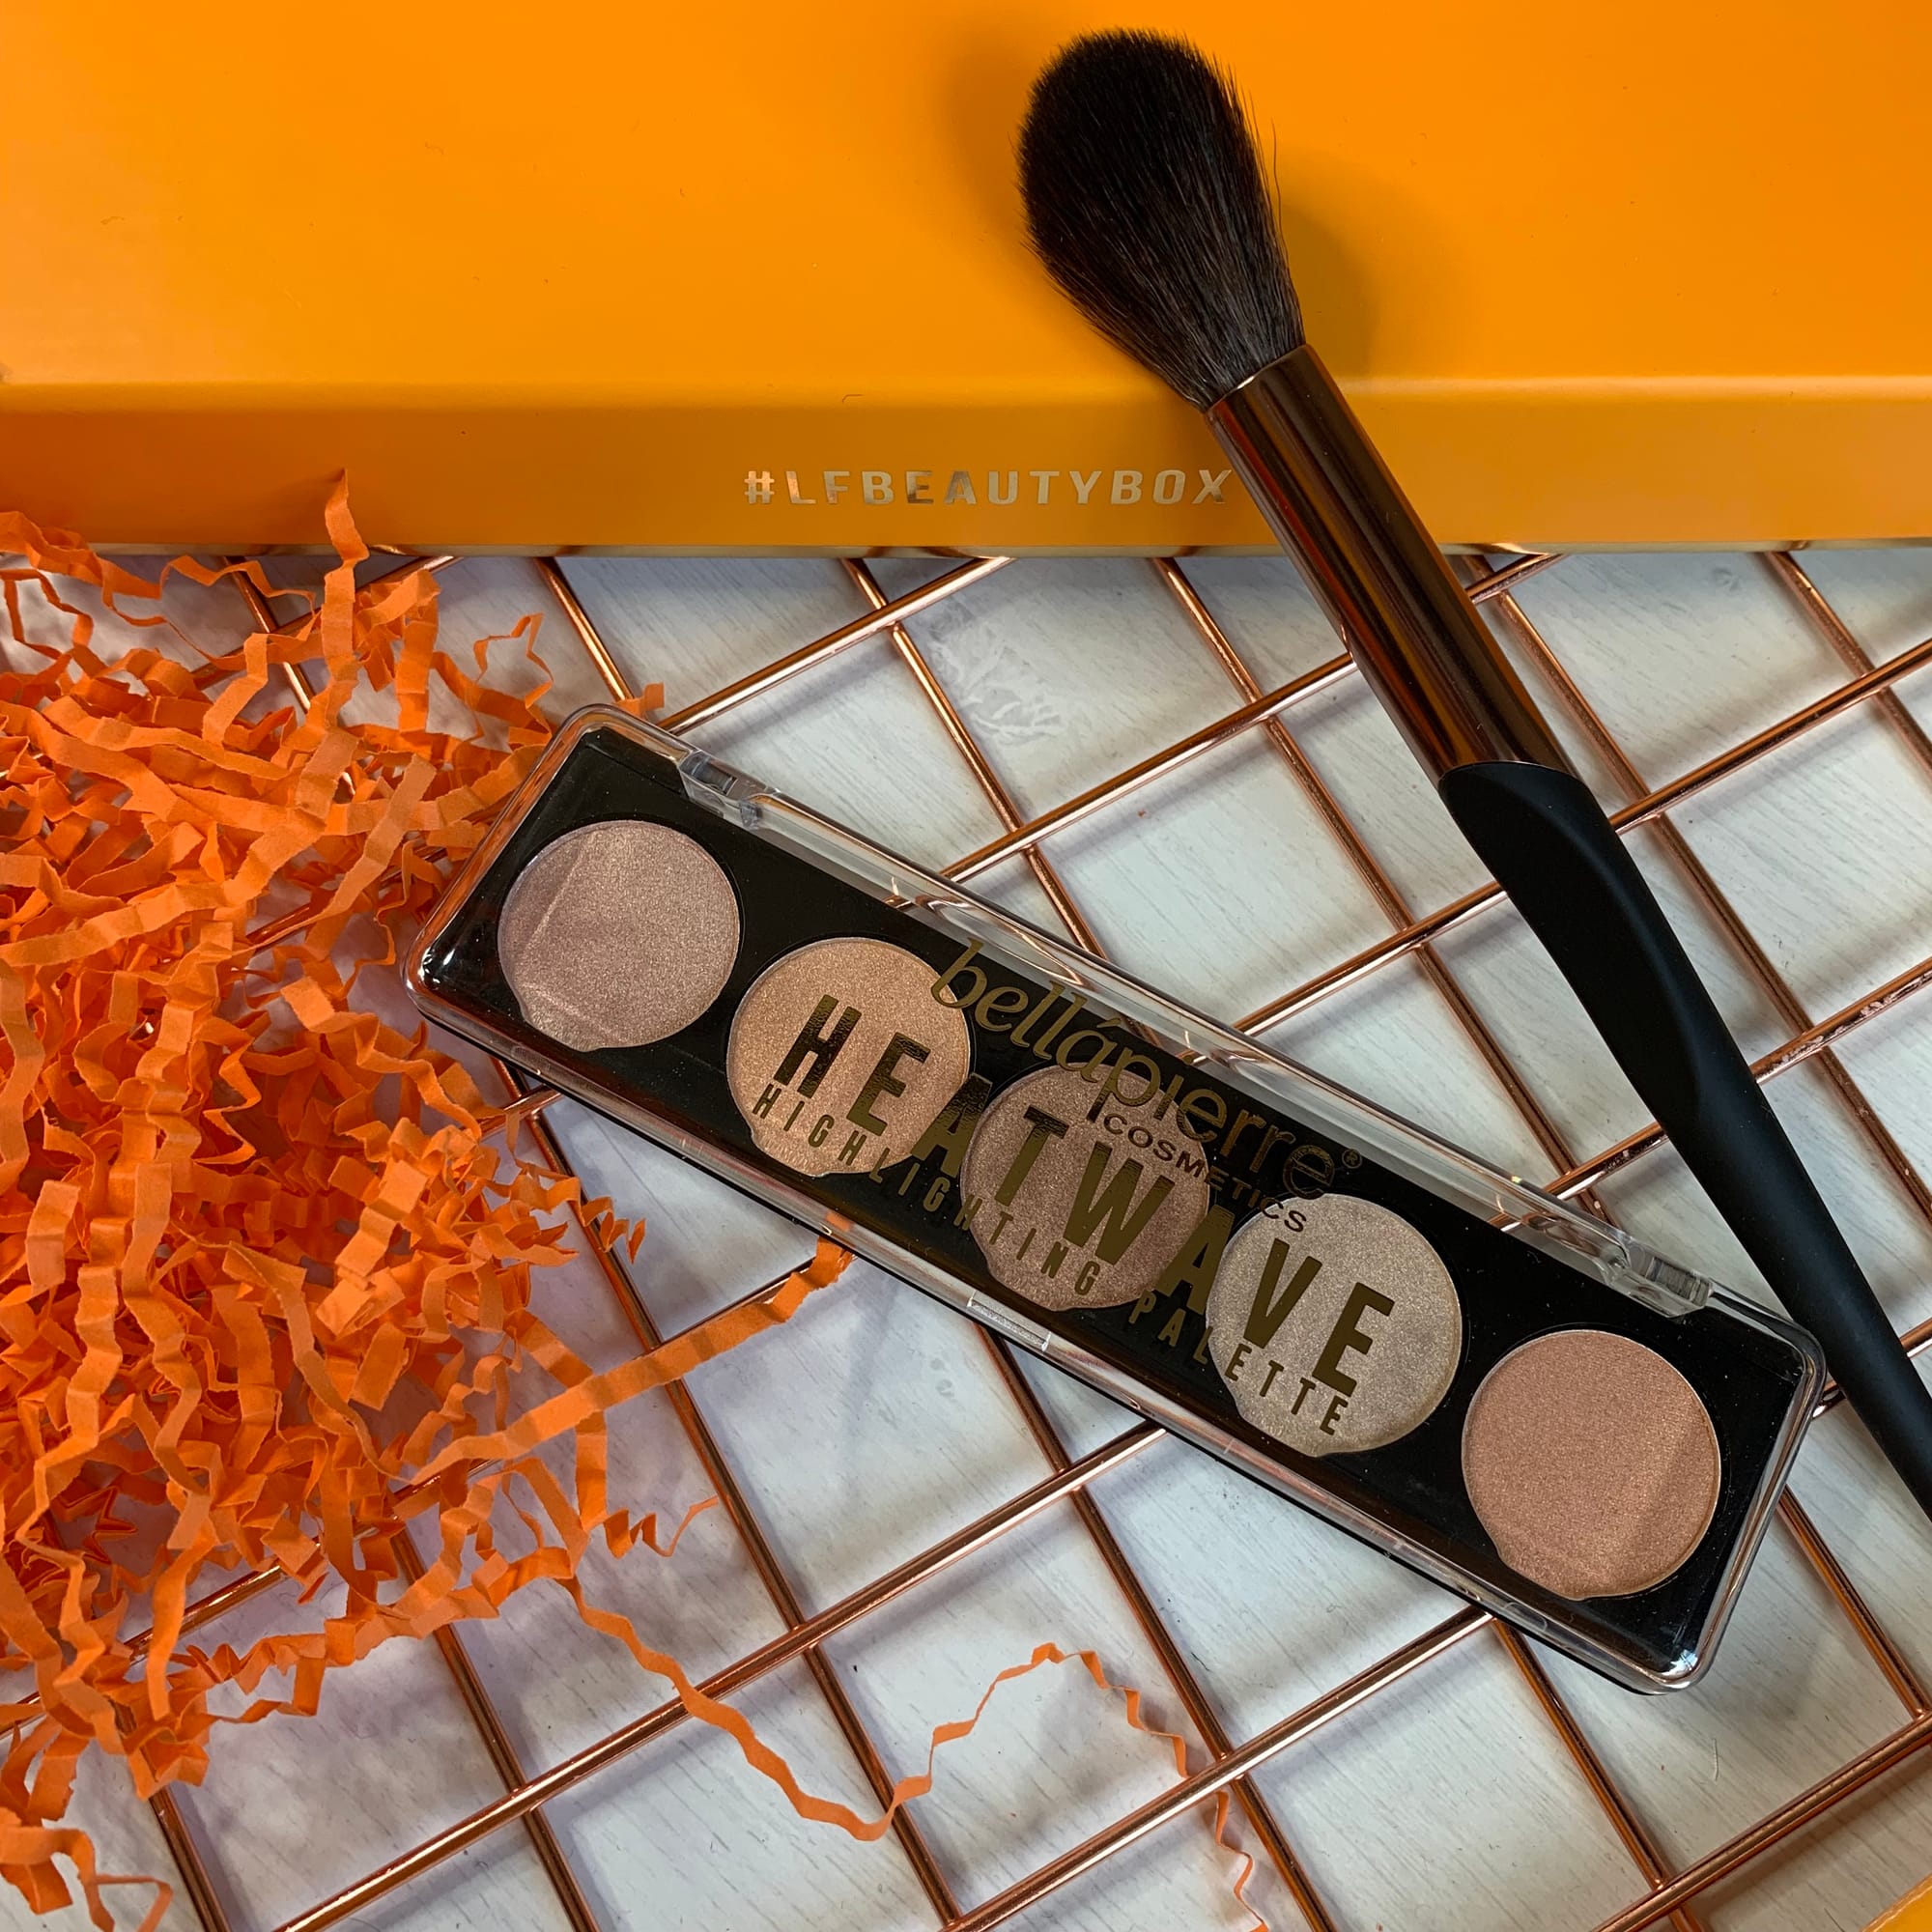 Bellapiere Highlighting Palette - Look Fantastic Beauty Box Review - August 2019 - Miss Boux